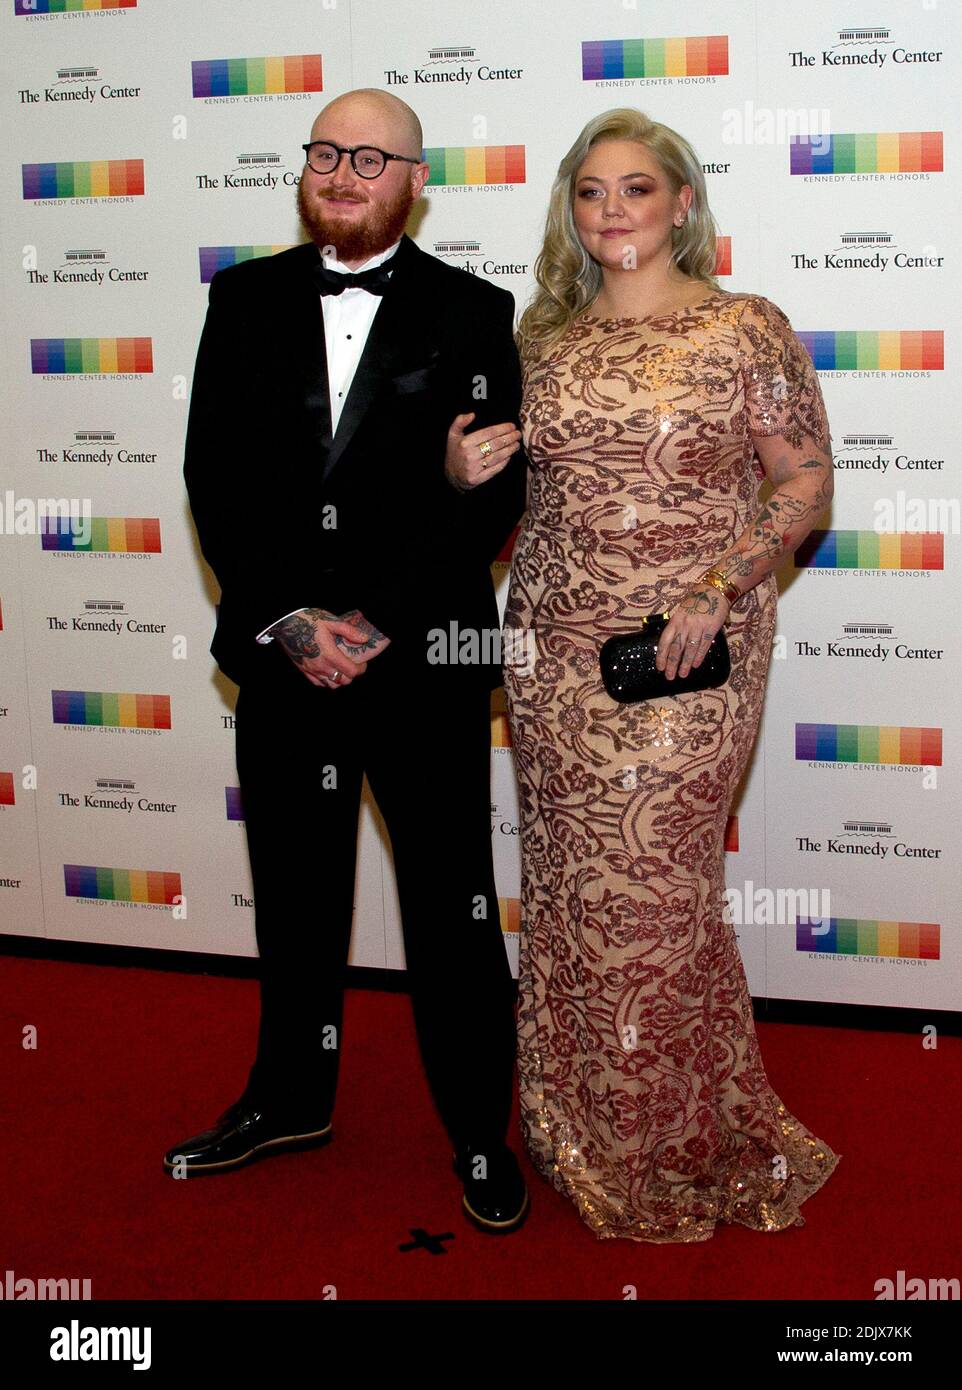 Singer Elle King and fiance Andrew Ferguson arrive for the formal Artist's Dinner honoring the recipients of the 39th Annual Kennedy Center Honors hosted by United States Secretary of State John F. Kerry at the U.S. Department of State in Washington, D.C. on Saturday, December 3, 2016. The 2016 honorees are: Argentine pianist Martha Argerich; rock band the Eagles; screen and stage actor Al Pacino; gospel and blues singer Mavis Staples; and musician James Taylor. Photo by Ron Sachs /Pool via CNP/ABACAPRESS.COM Stock Photo